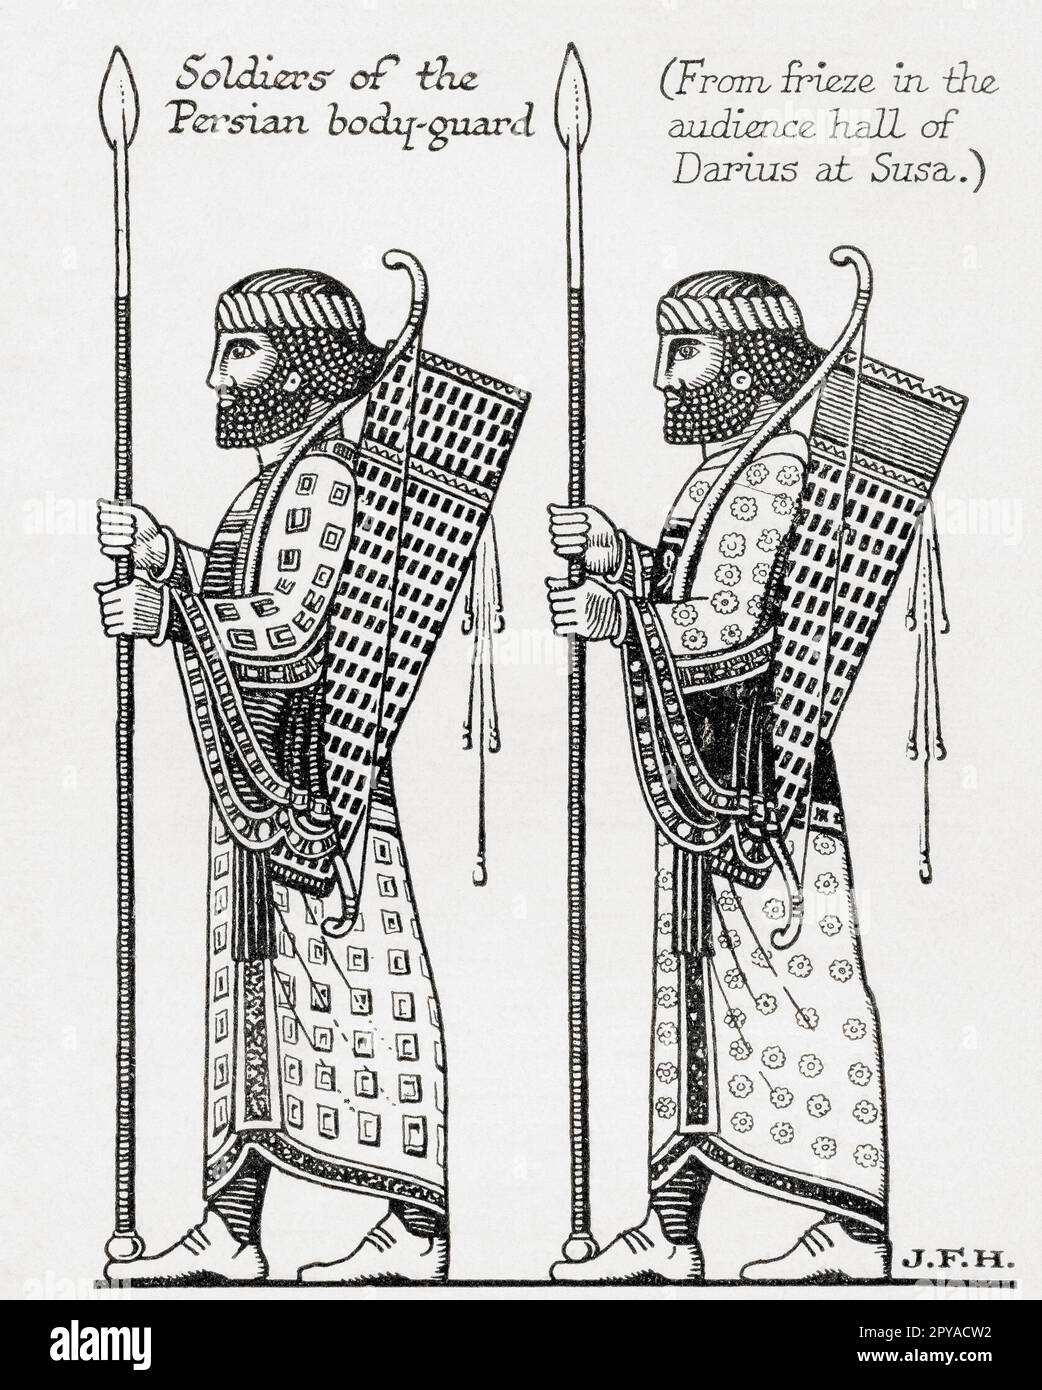 Soldiers of the Persian bodyguard.  From the frieze in the audience hall of Darius at Susa.  From the book Outline of History by H.G. Wells, published 1920. Stock Photo